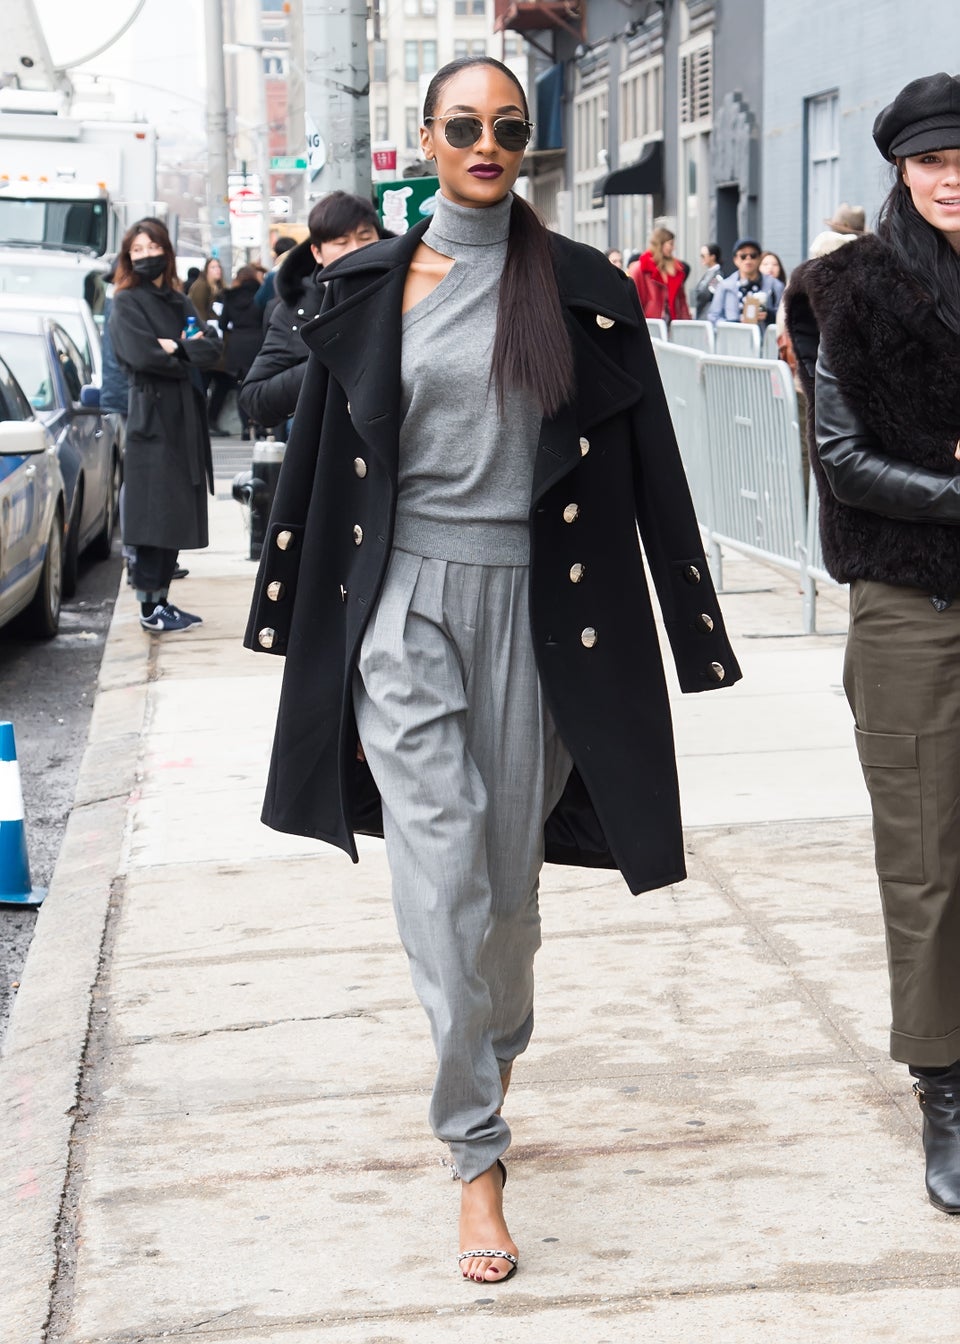 23 Times Jourdan Dunn Brought Her Supermodel Style to the Streets